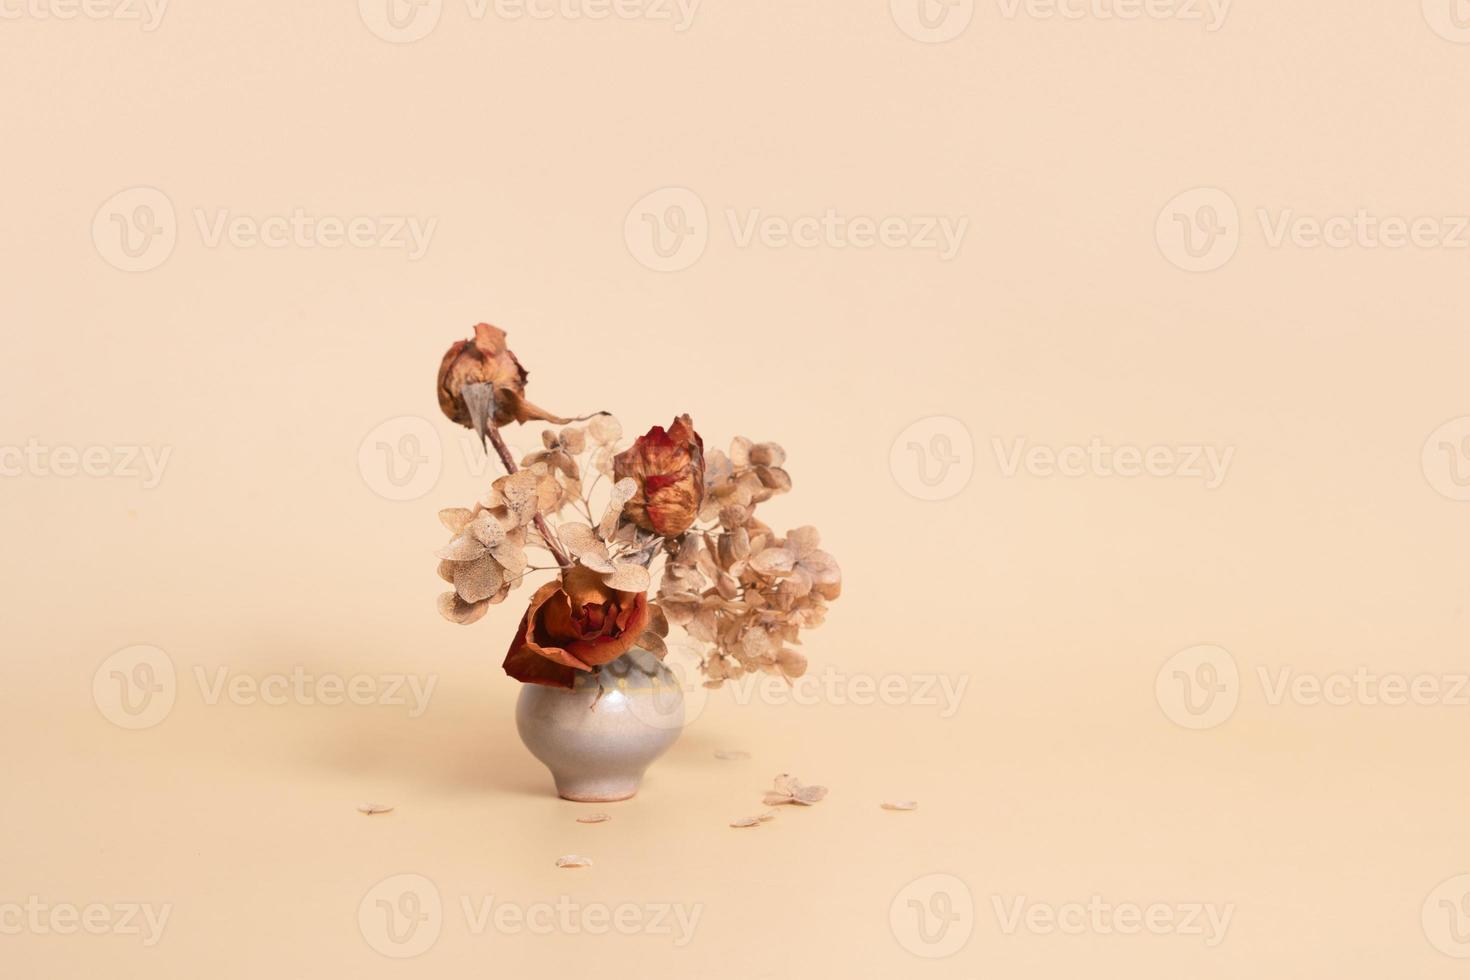 Miniature vase with dried flowers with copy space. Still life monochrome minimalist neutral color concept photo